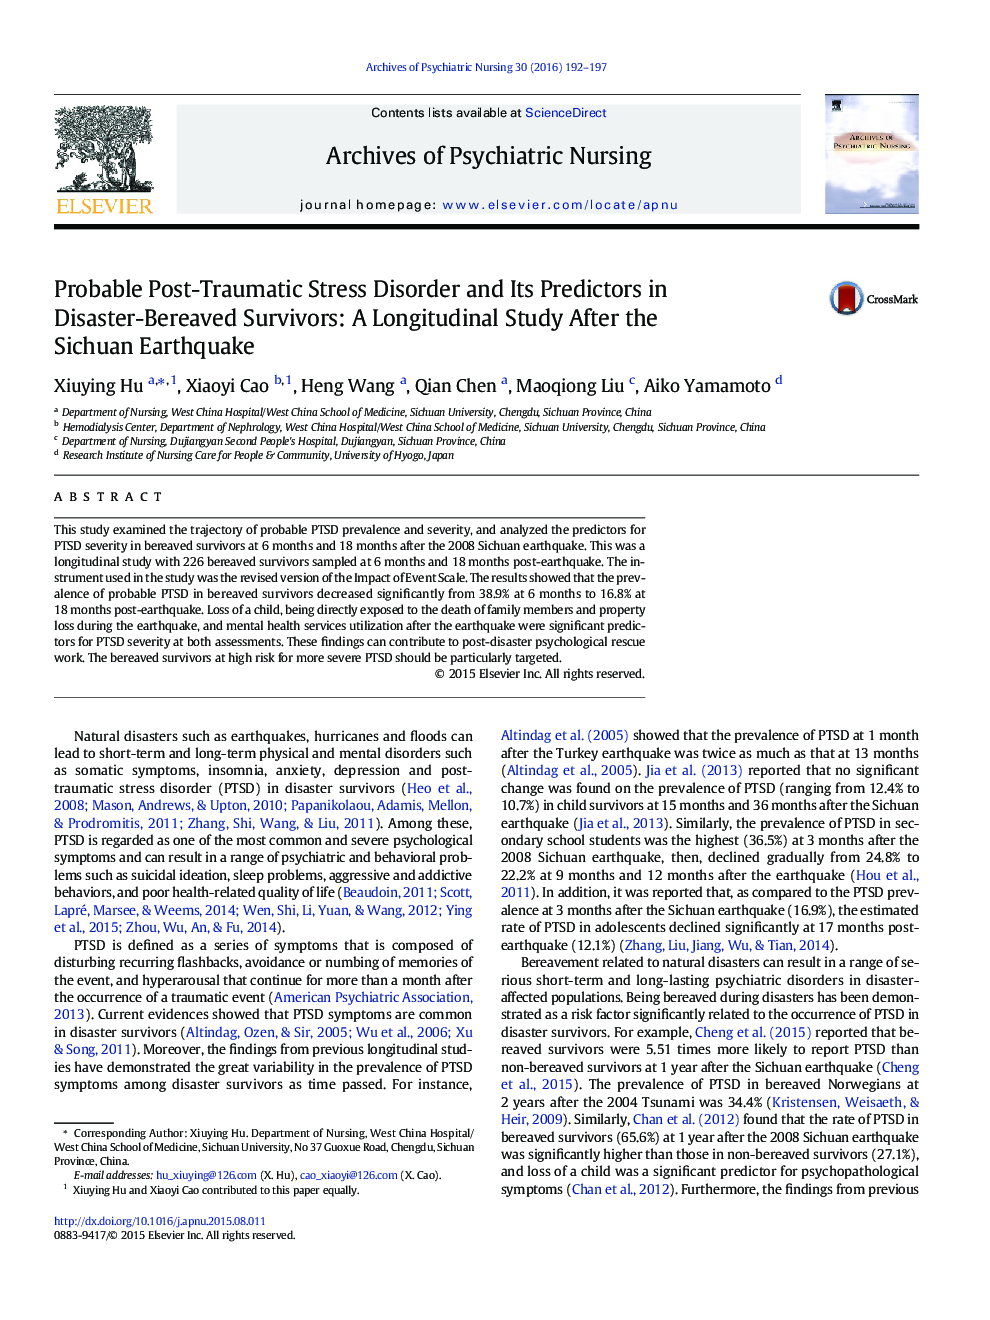 Probable Post-Traumatic Stress Disorder and Its Predictors in Disaster-Bereaved Survivors: A Longitudinal Study After the Sichuan Earthquake